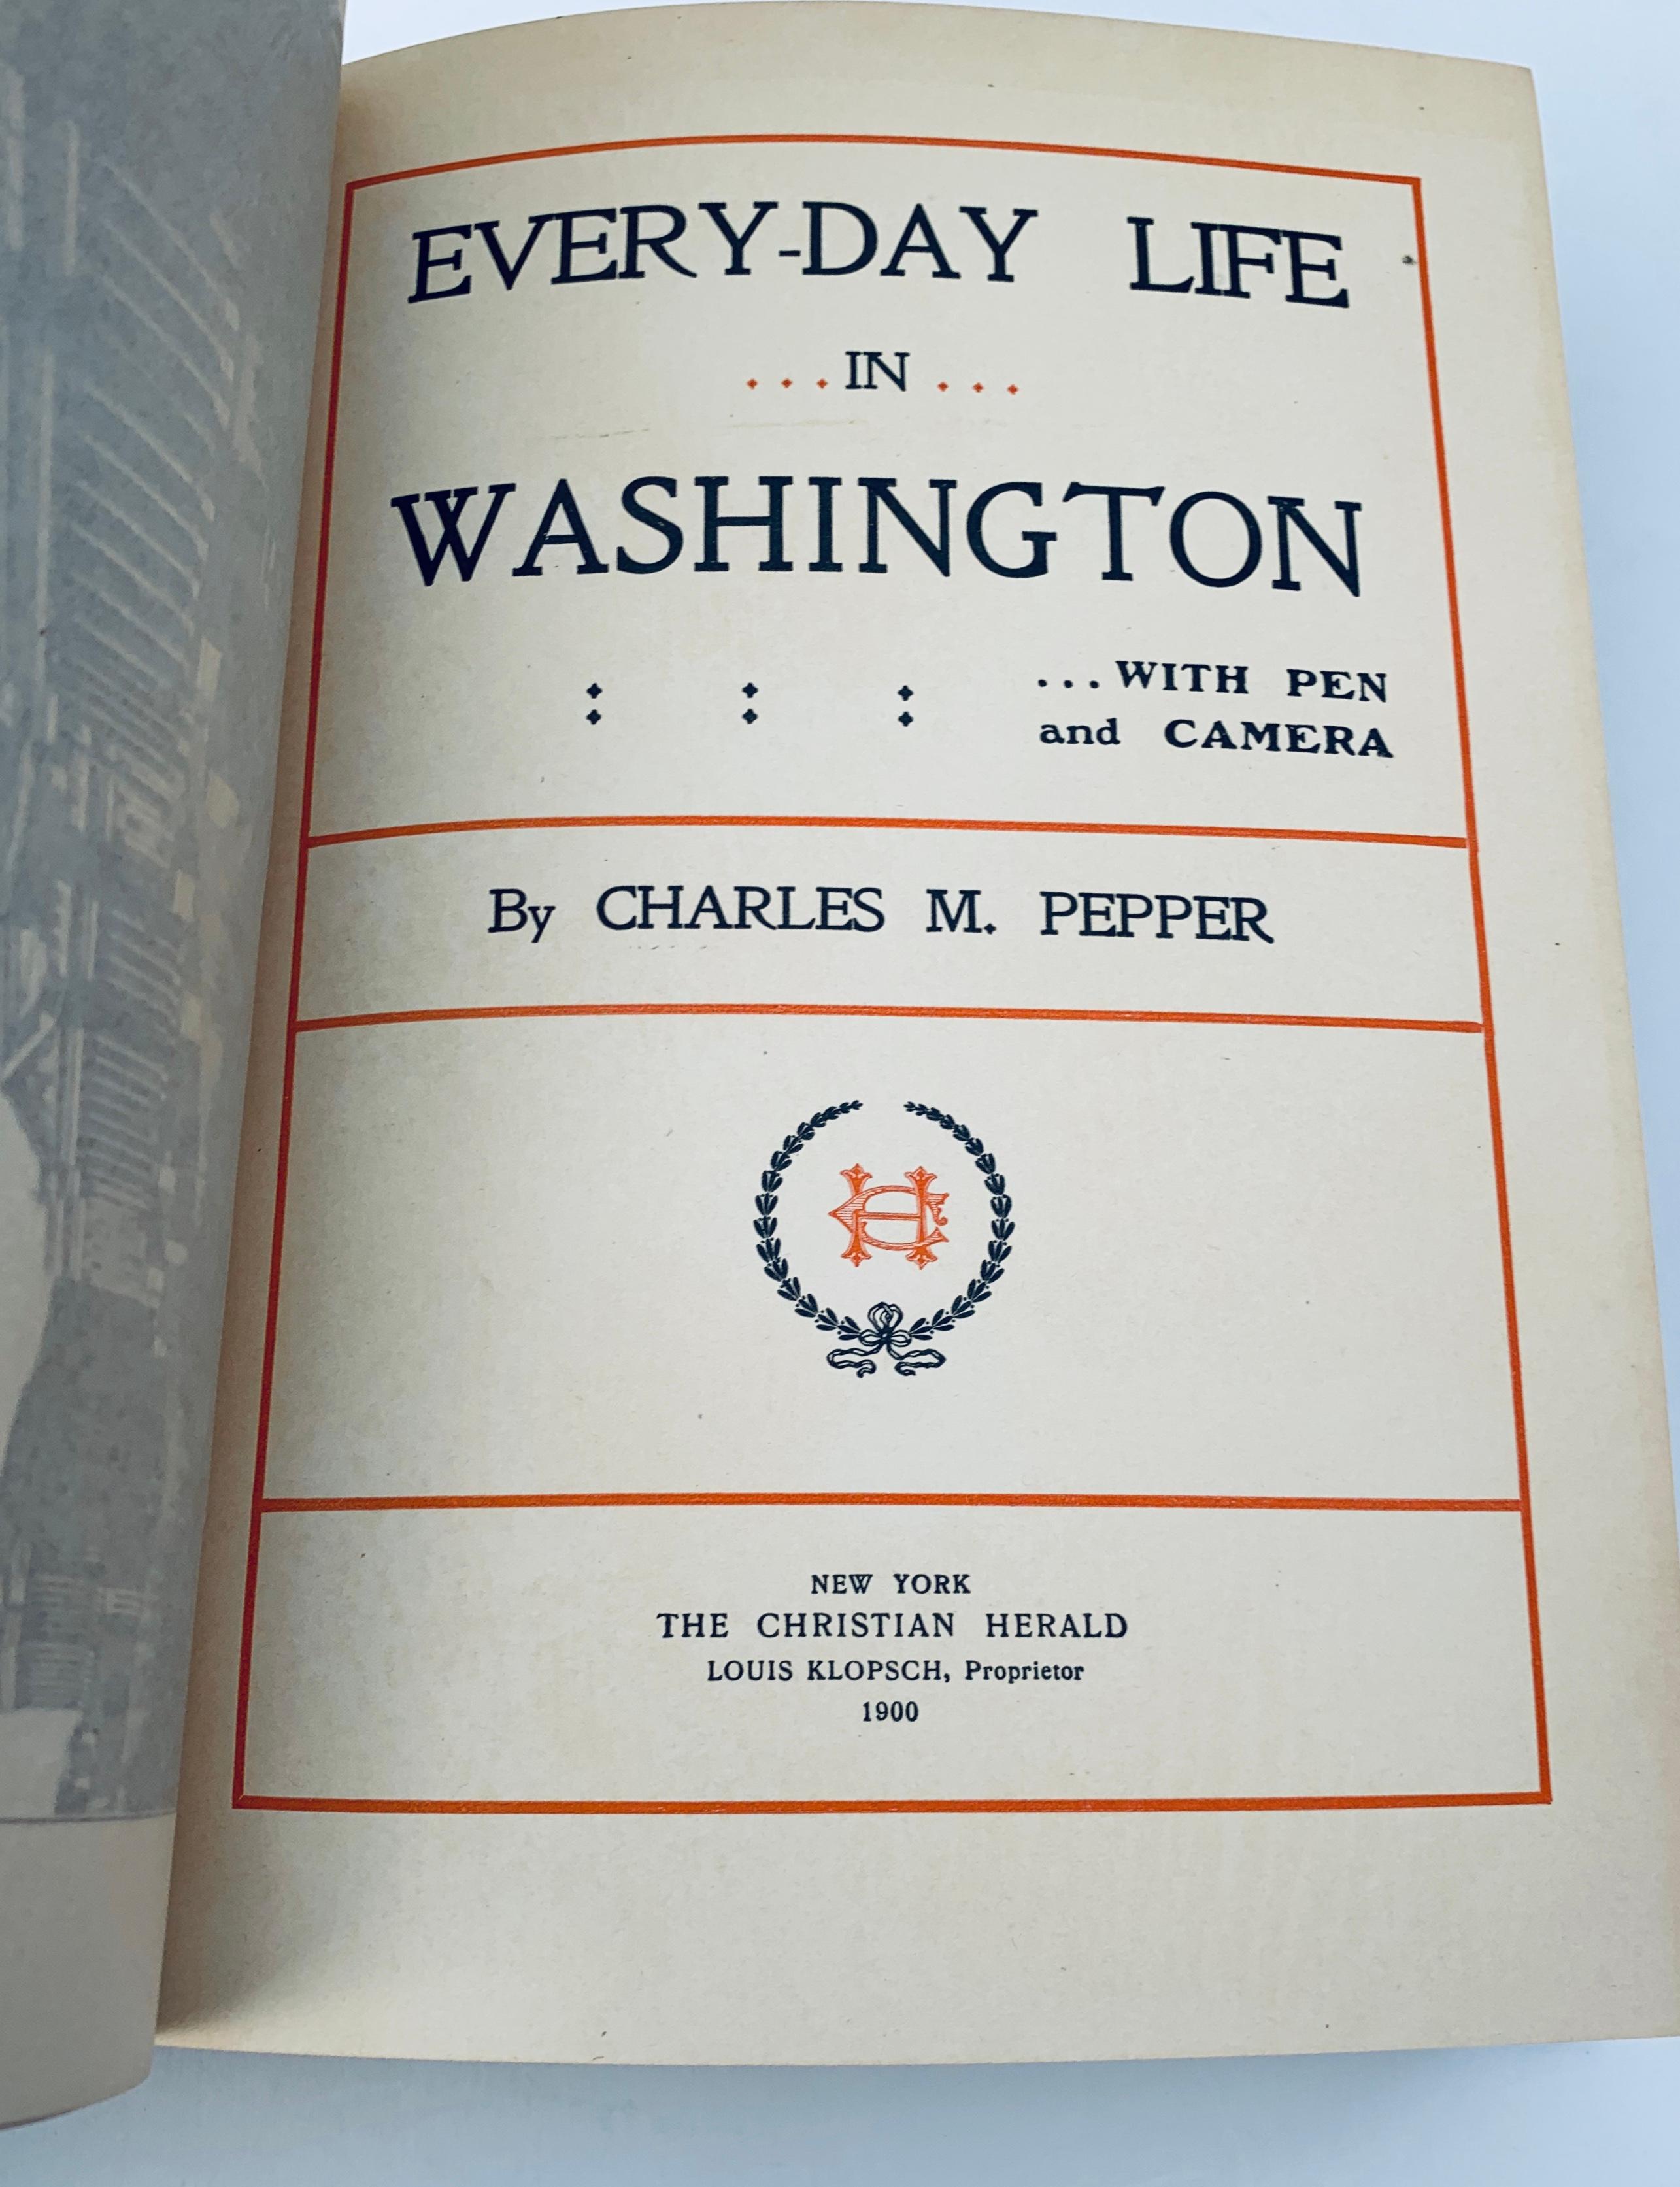 Every-Day Life in WASHINGTON by Charles M. Pepper (1900)